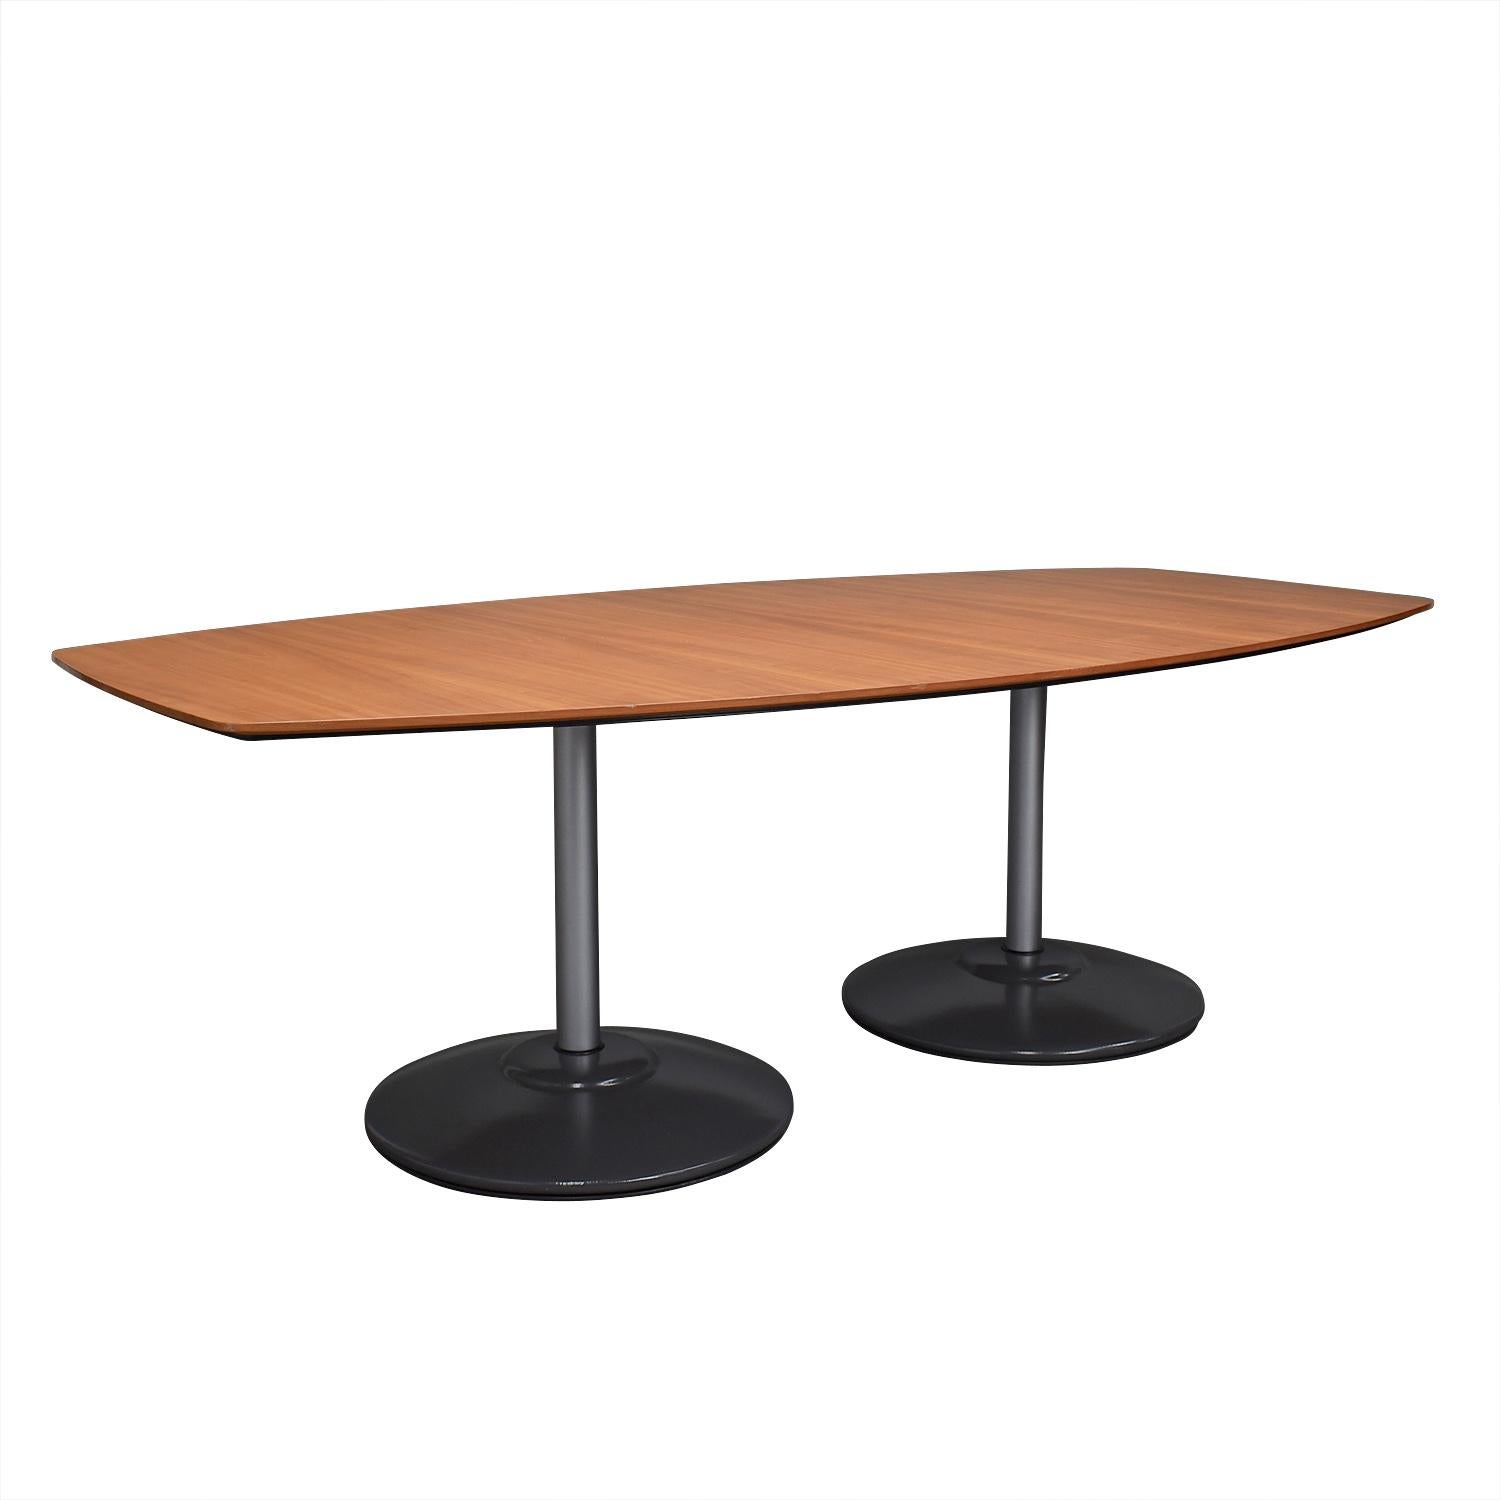 Large dining / conference table by Vico Magistretti for Fritz Hansen.

Designer: Vico Magistretti (Italy)

Manufacturer: Fritz Hansen (Denmark)

Model: Dining table

Material: Aluminium / Steel / Beechwood

Design period: